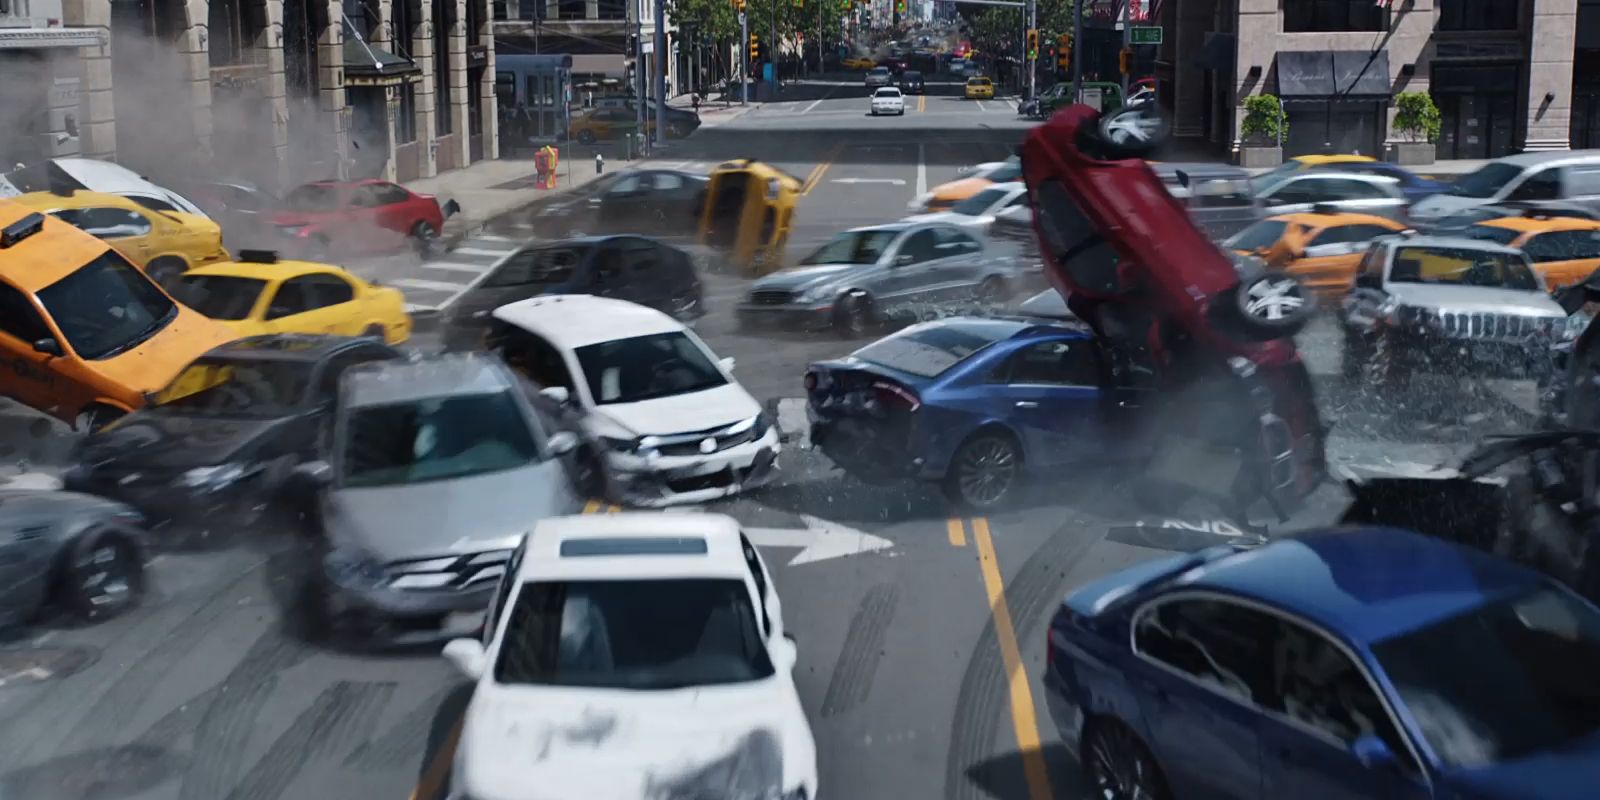 New York Car Stampede in Fate of the Furious